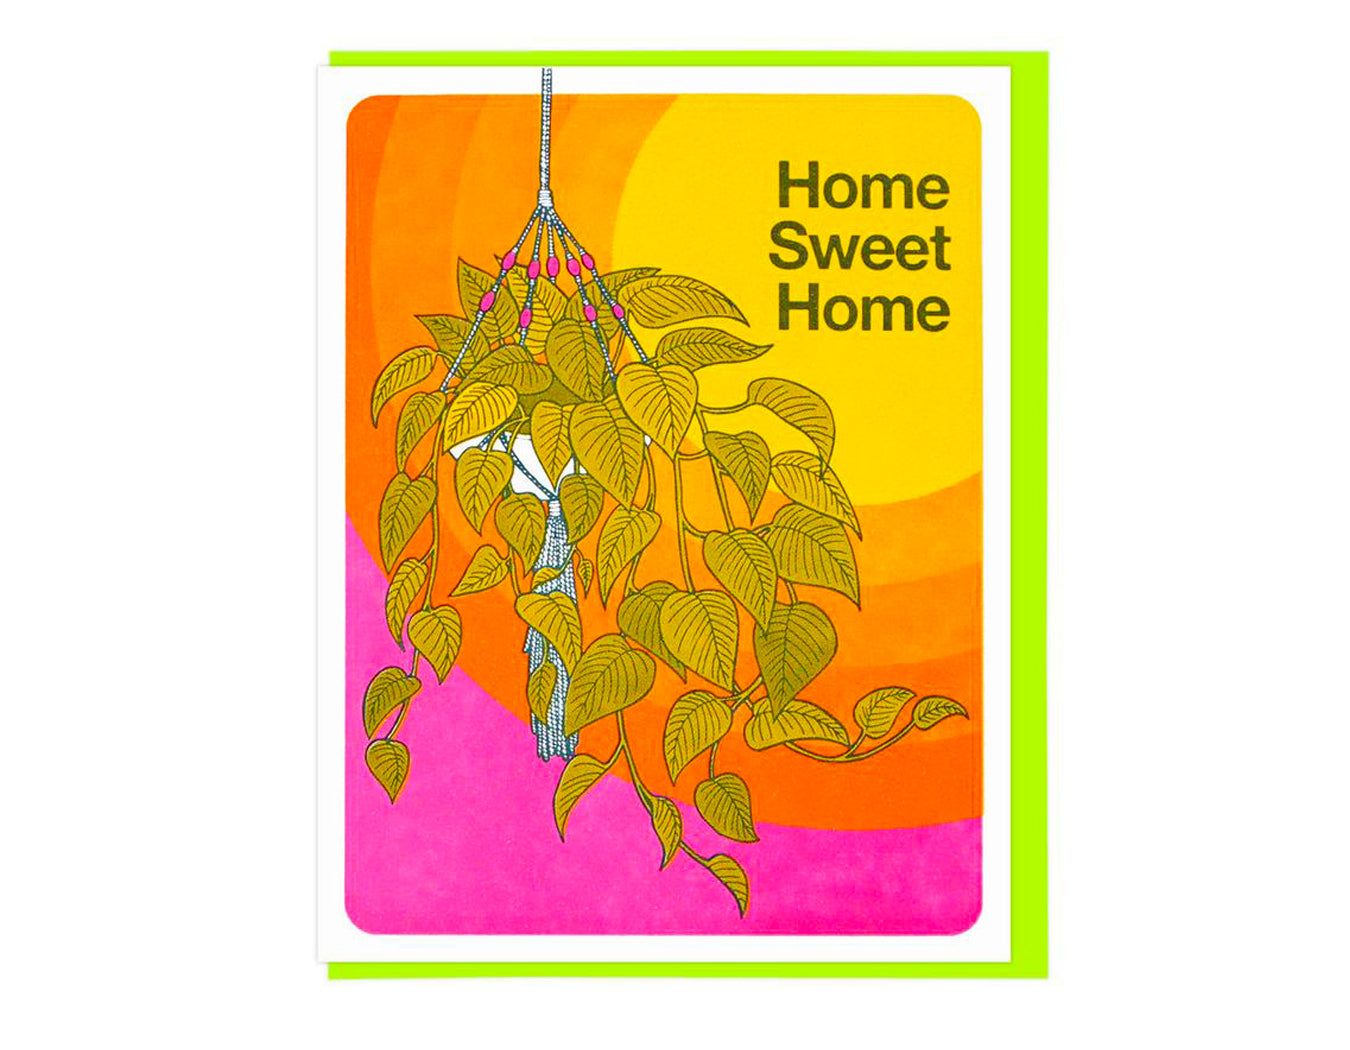  Features a hanging house plant and the words home sweet home on a background of yellow, orange, pink and green.